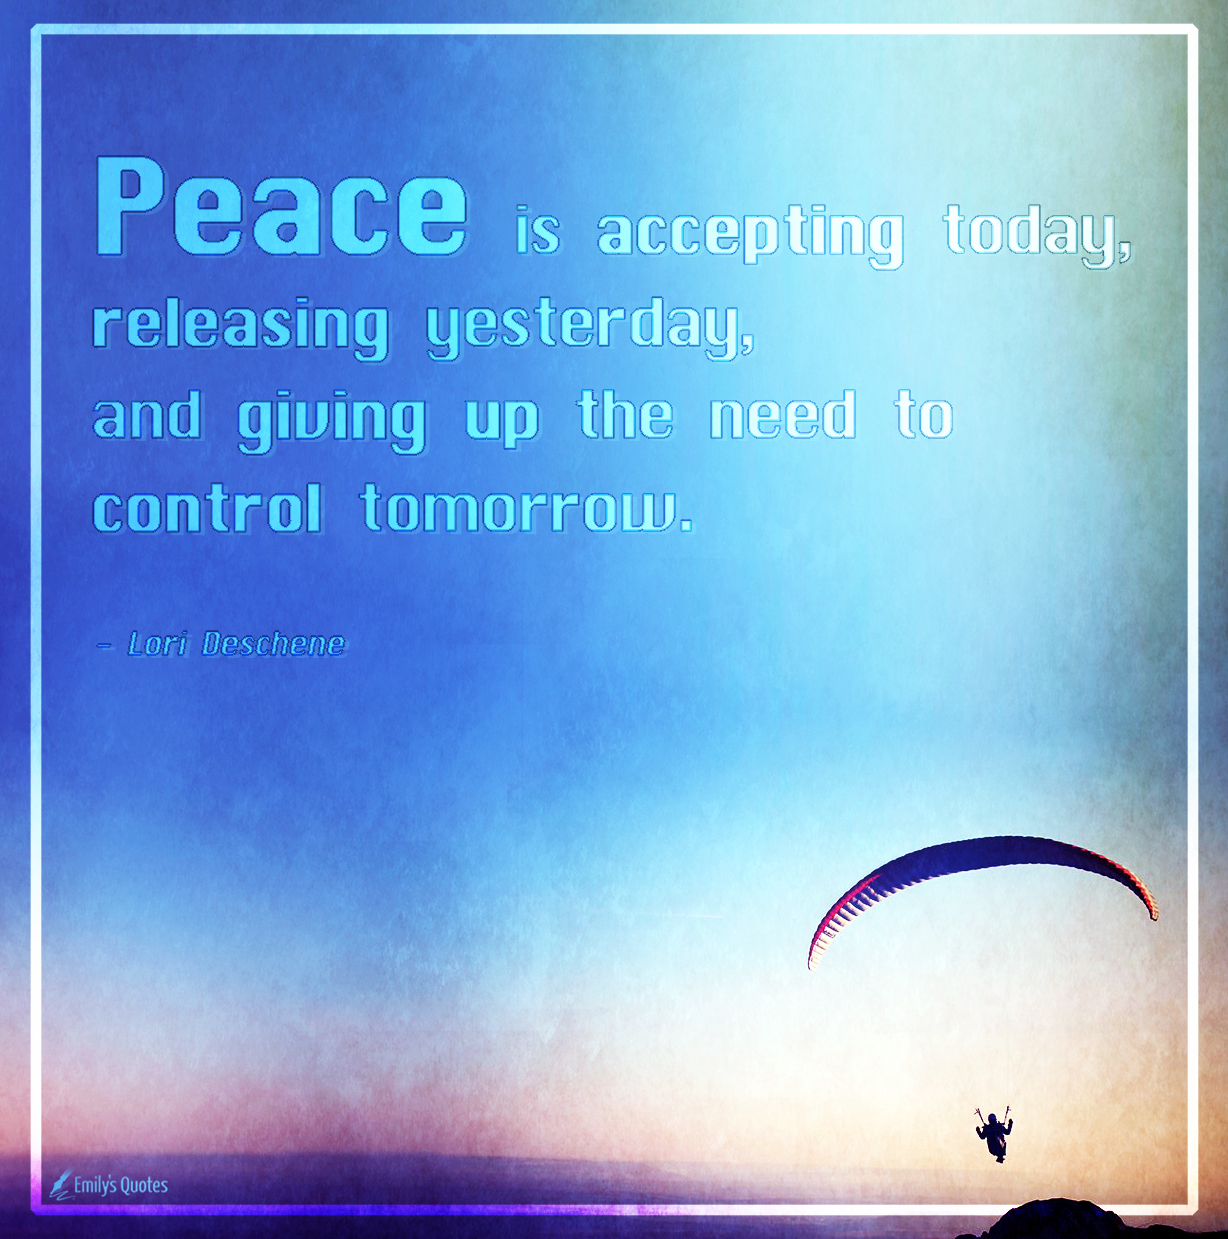 Peace is accepting today, releasing yesterday, and giving up the need to control tomorrow